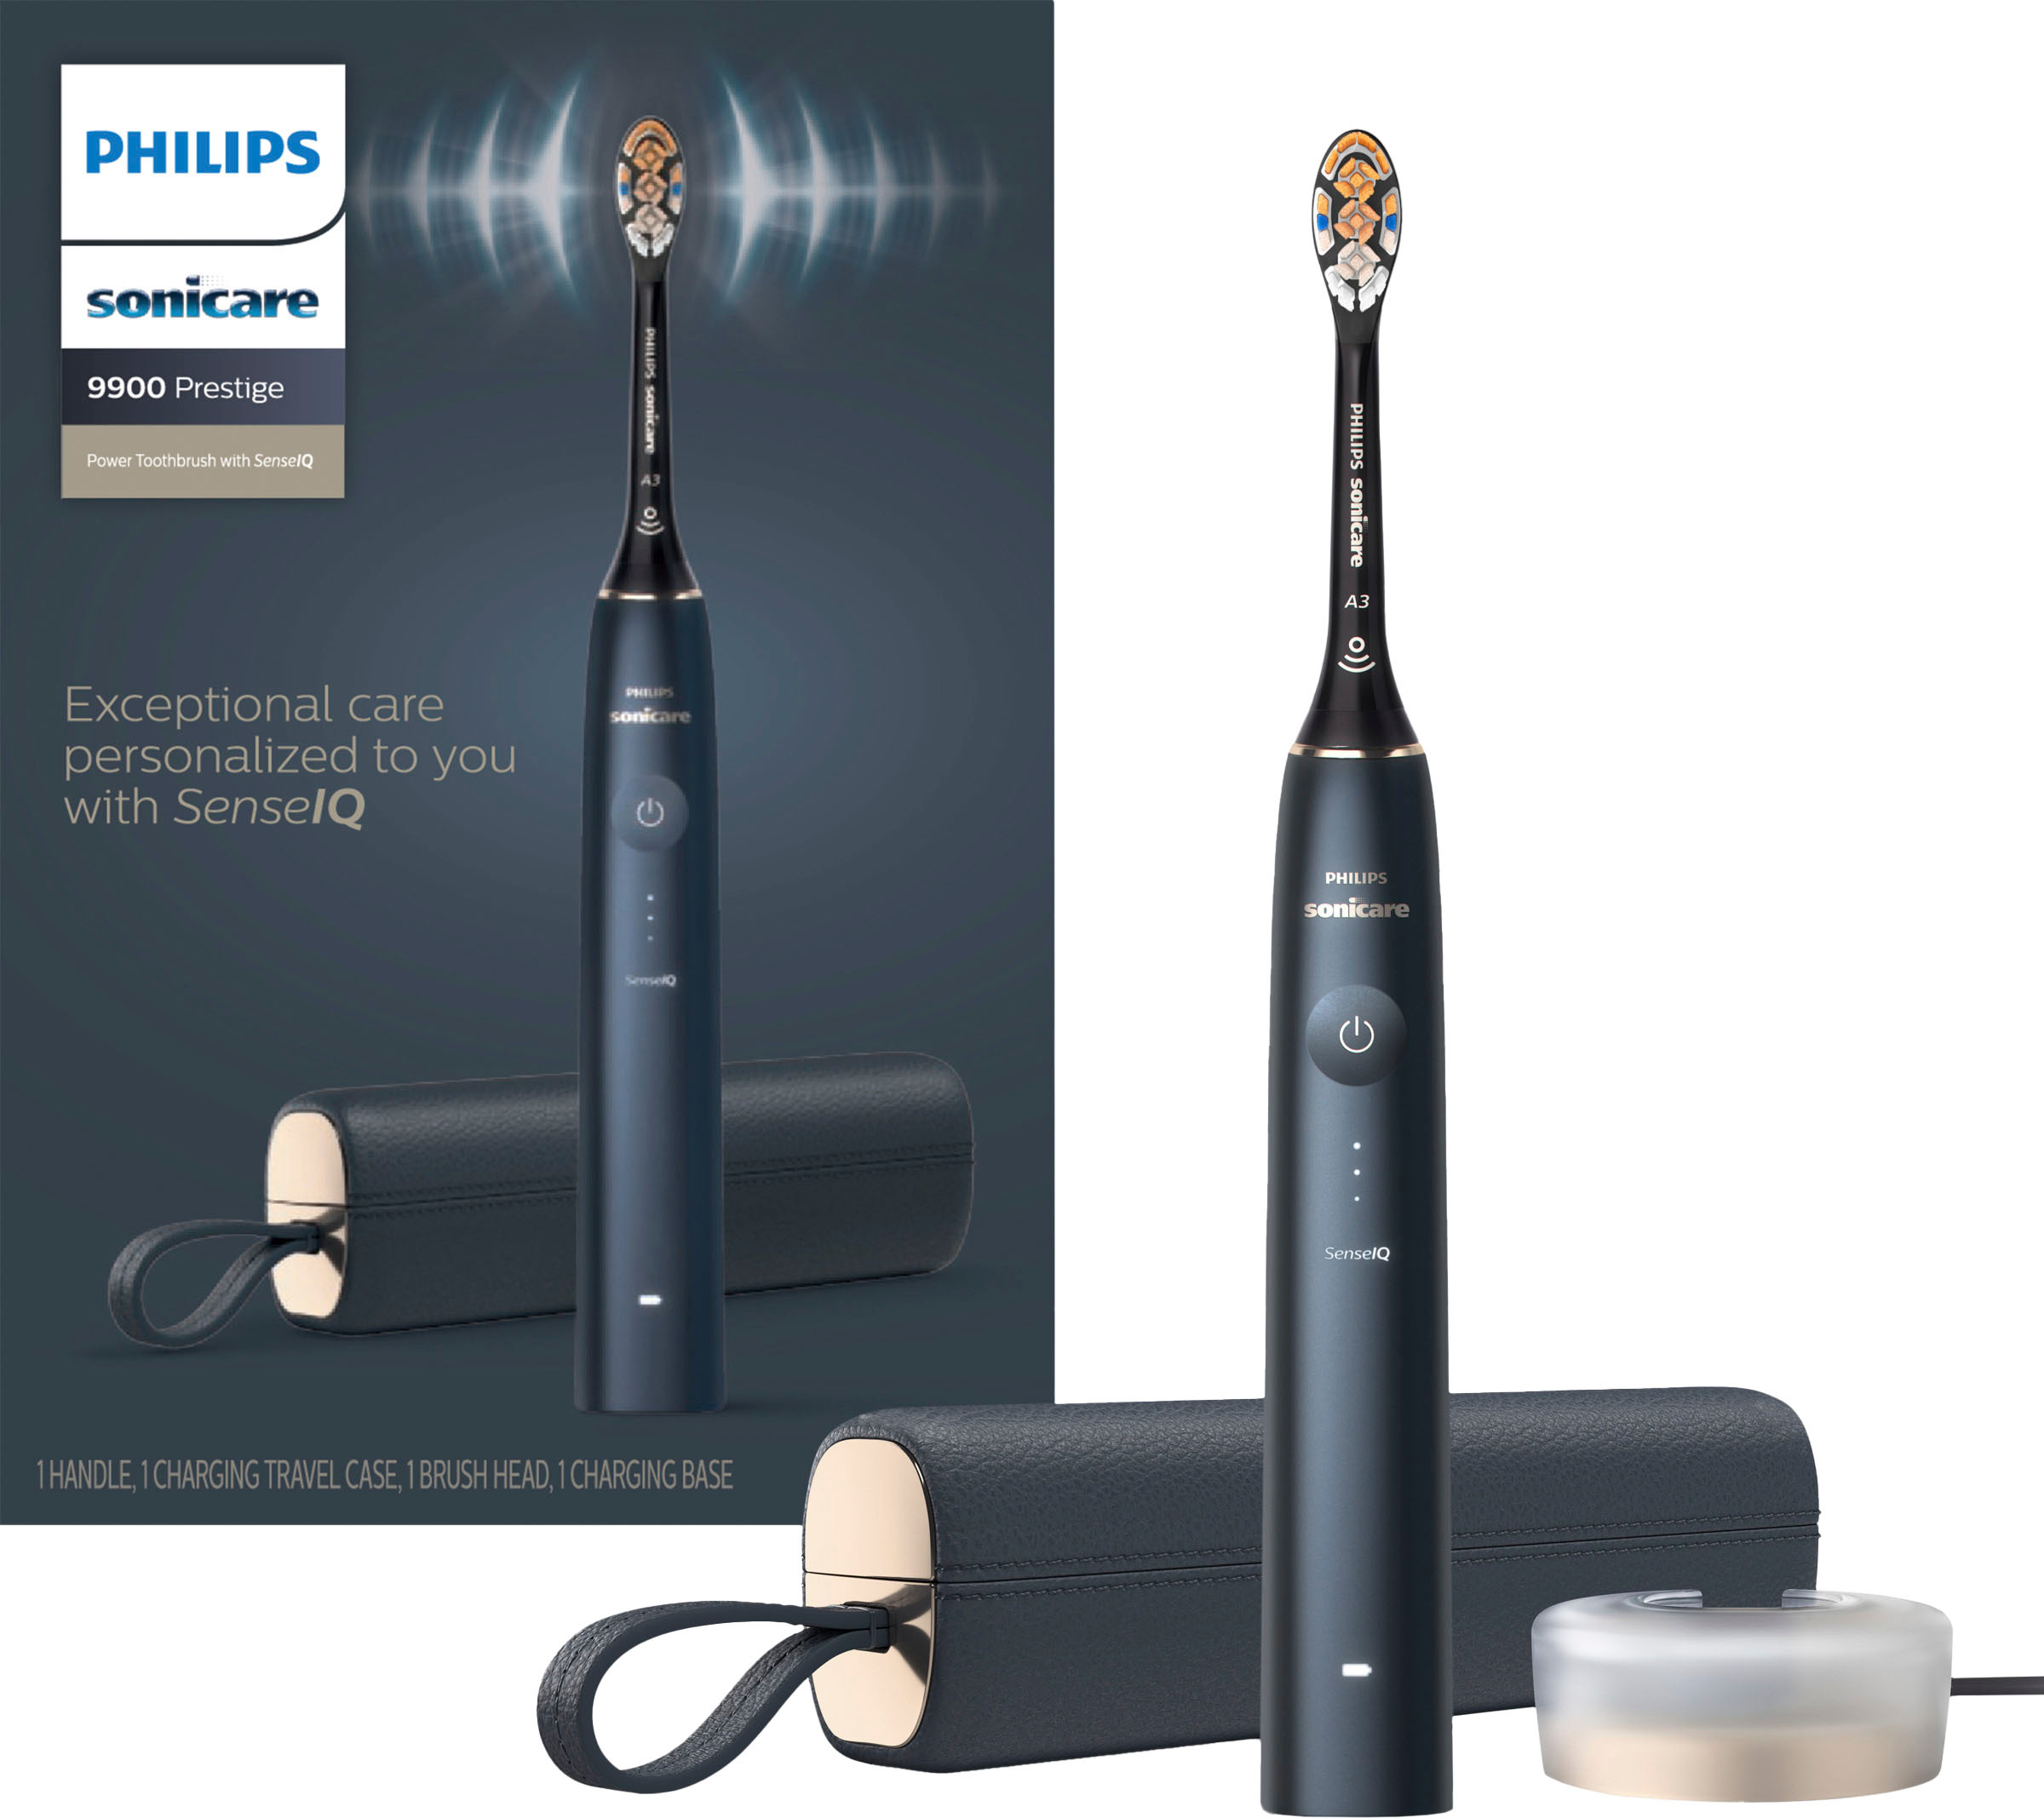 Philips Sonicare 9900 Prestige Rechargeable Electric Toothbrush ...